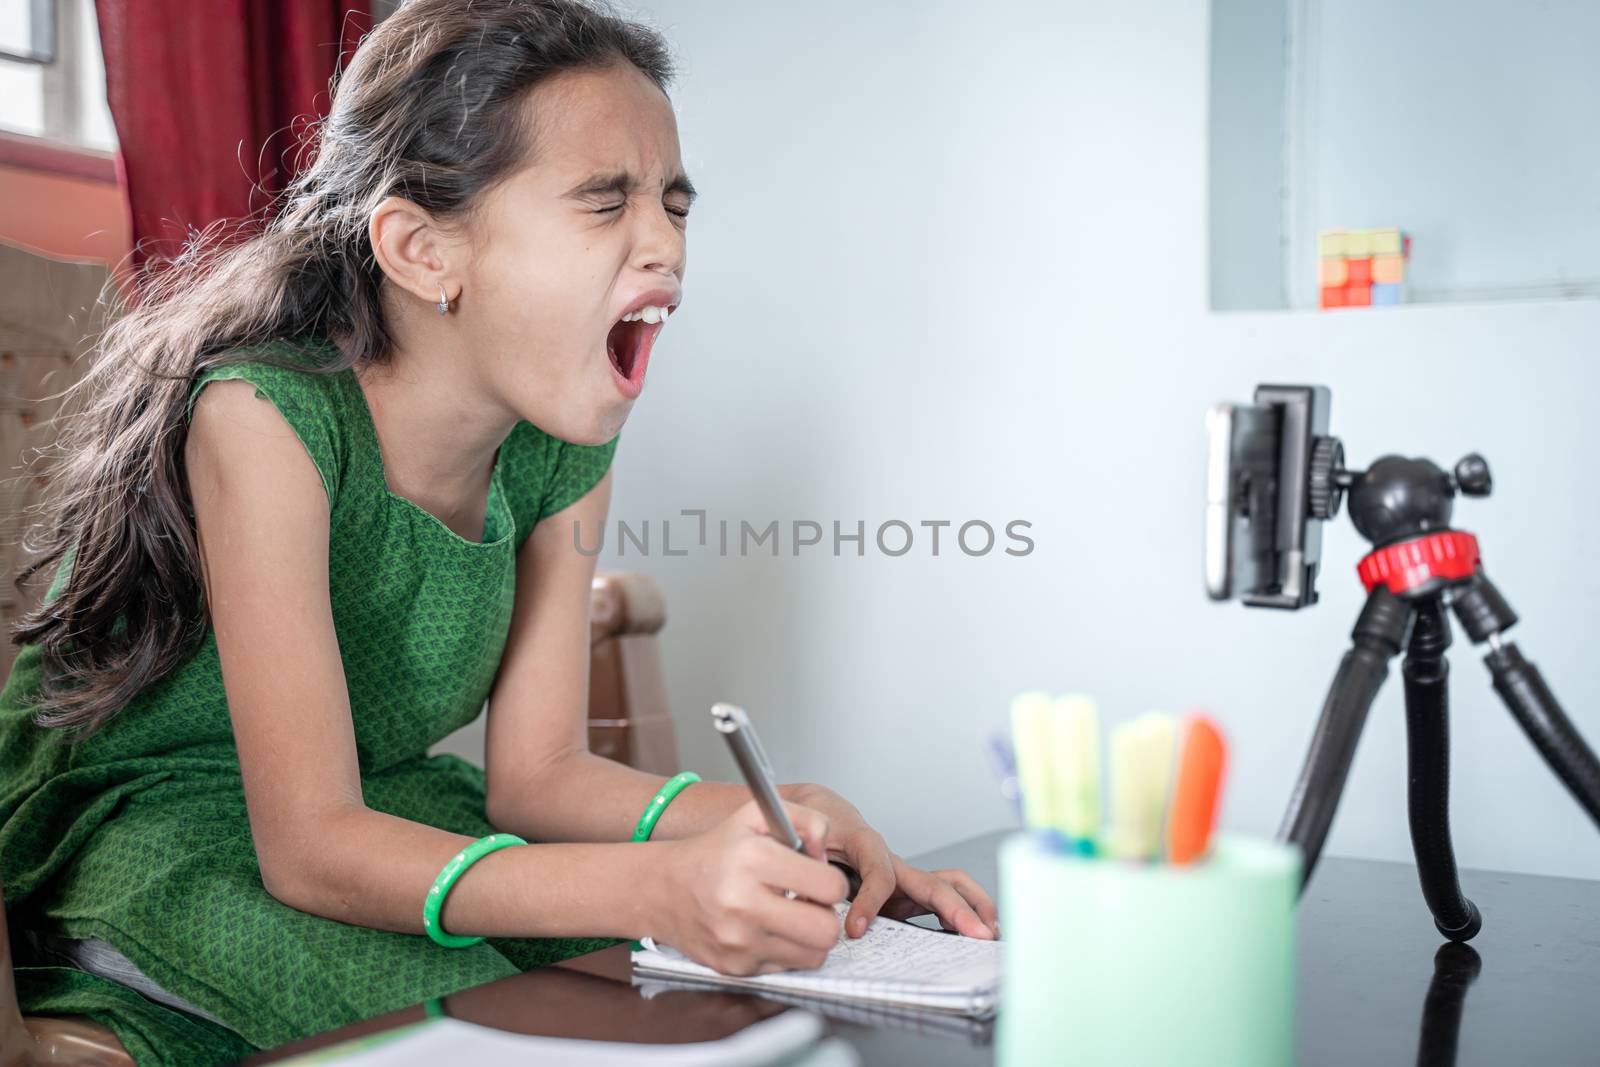 Girl shouting, screaming in front of mobilephone during e-learning or online class at home - concept of problem, stress, anxiety for students or kids in distance learning